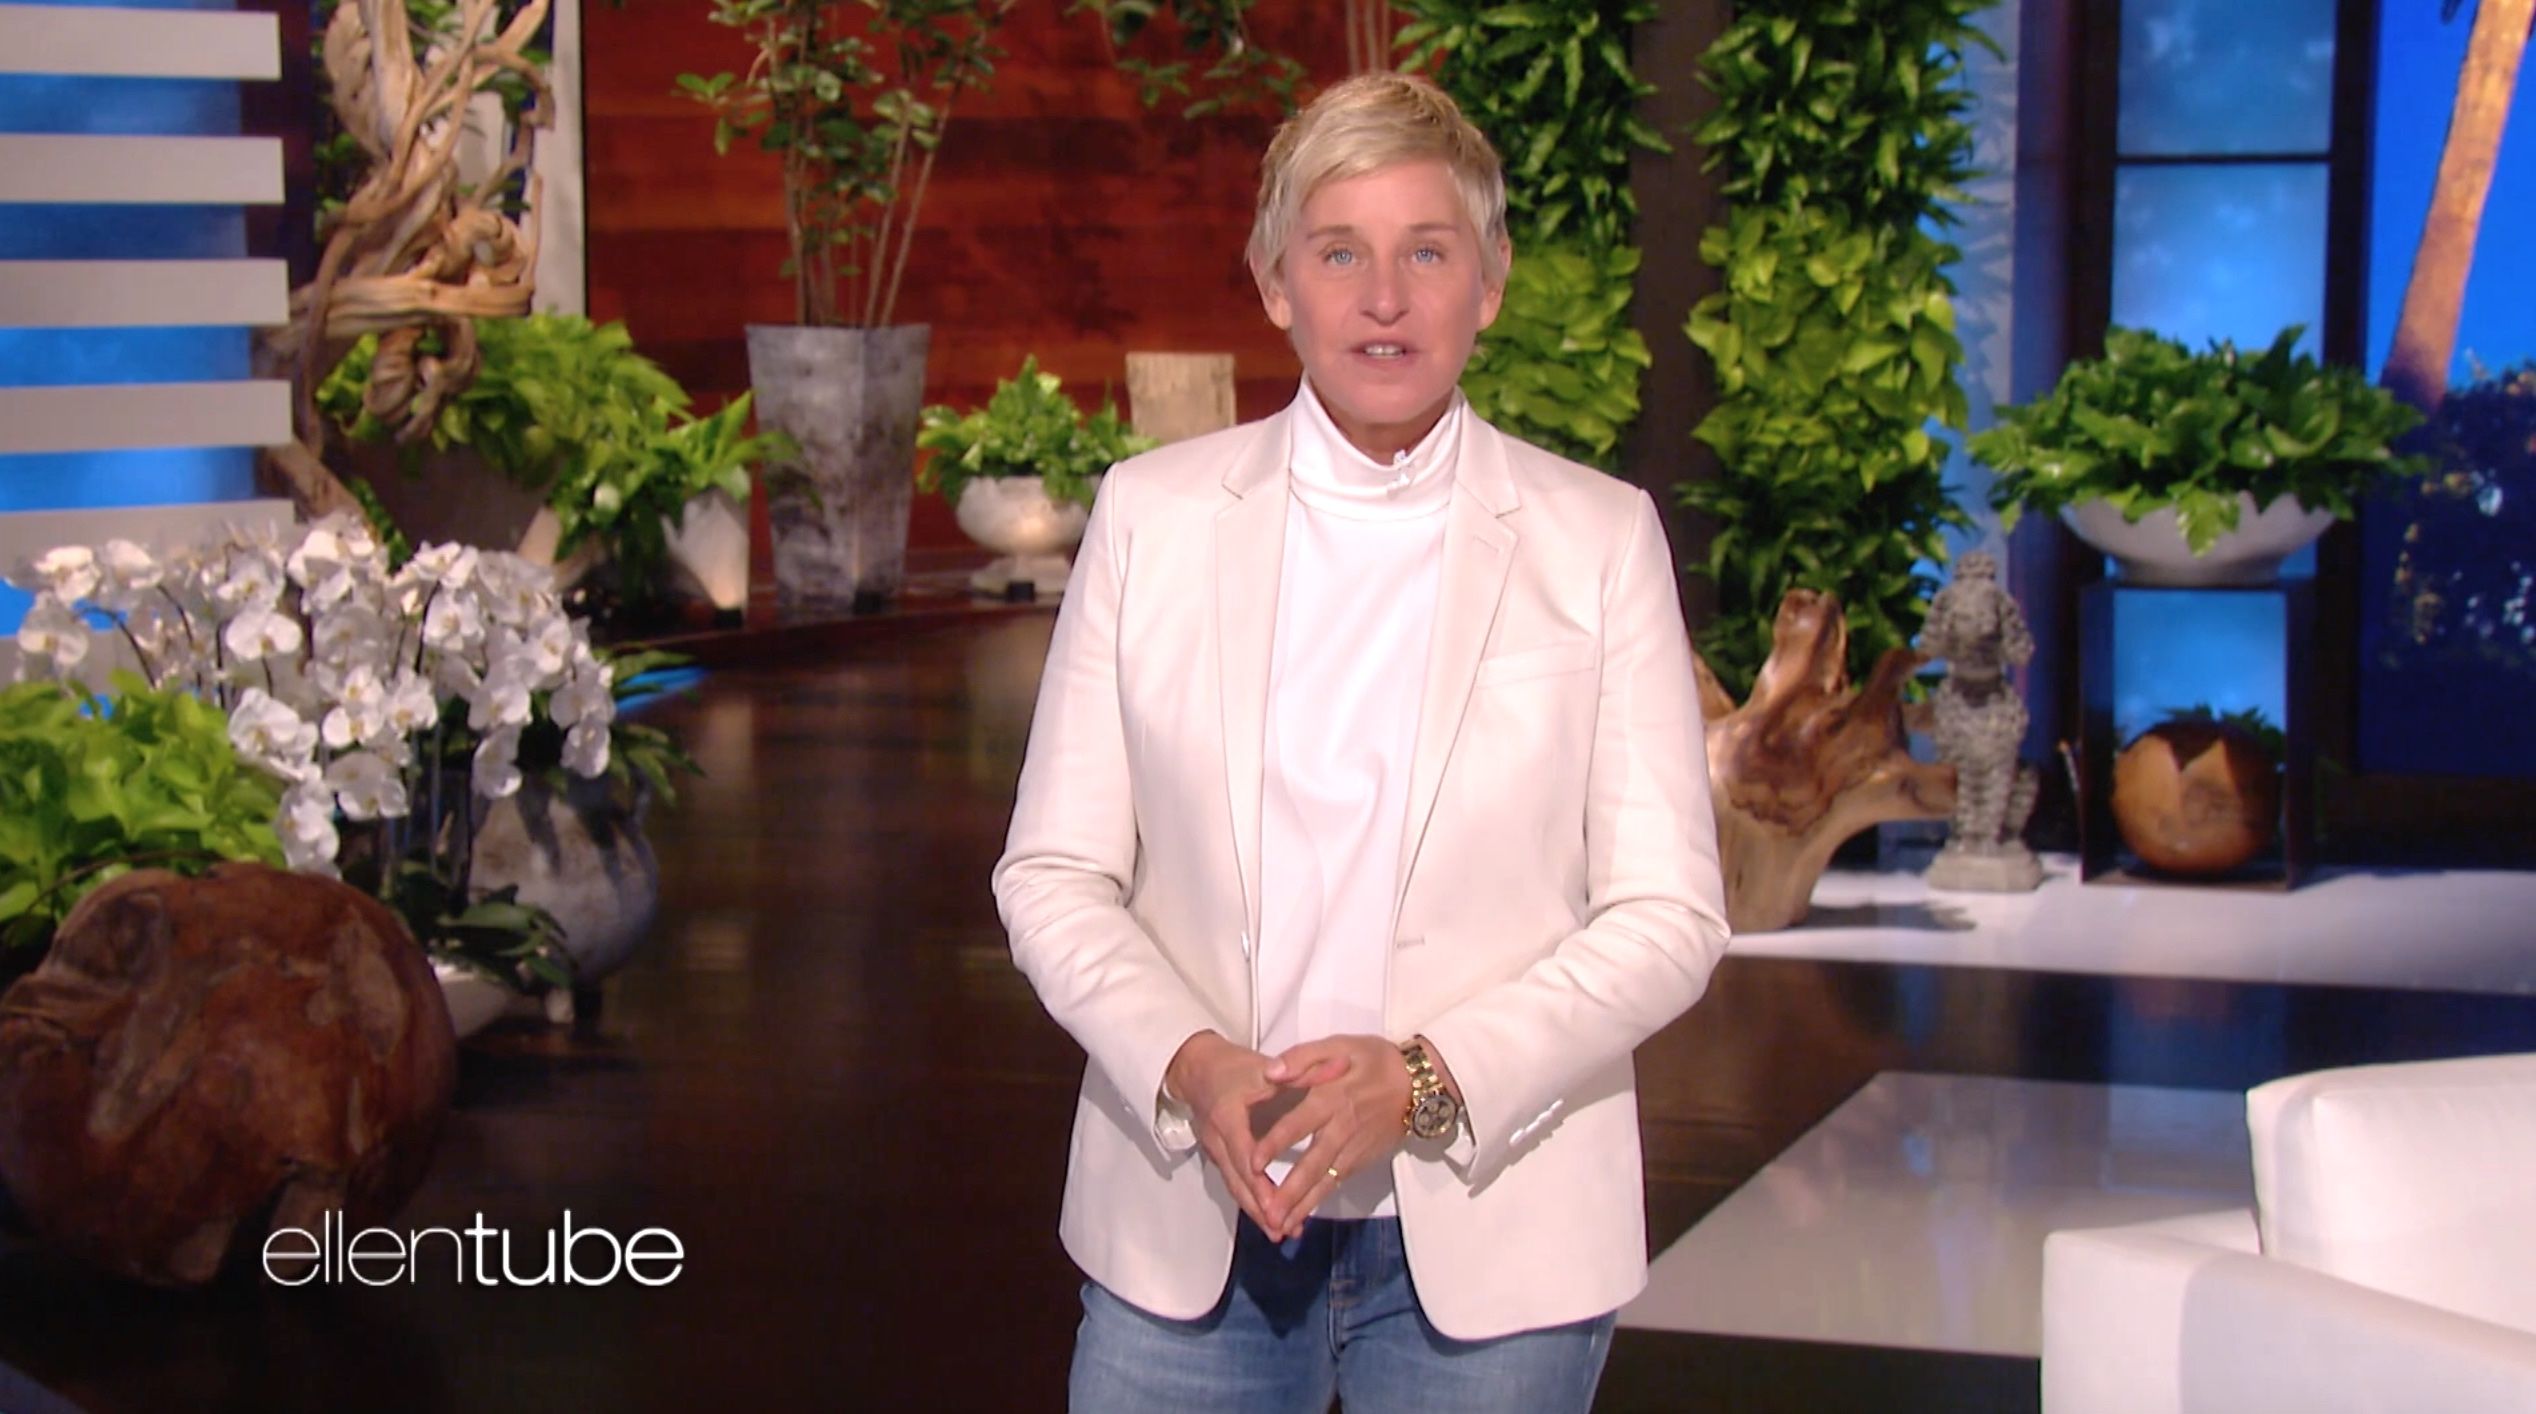 Ellen DeGeneres addresses claims of toxic workplace on air